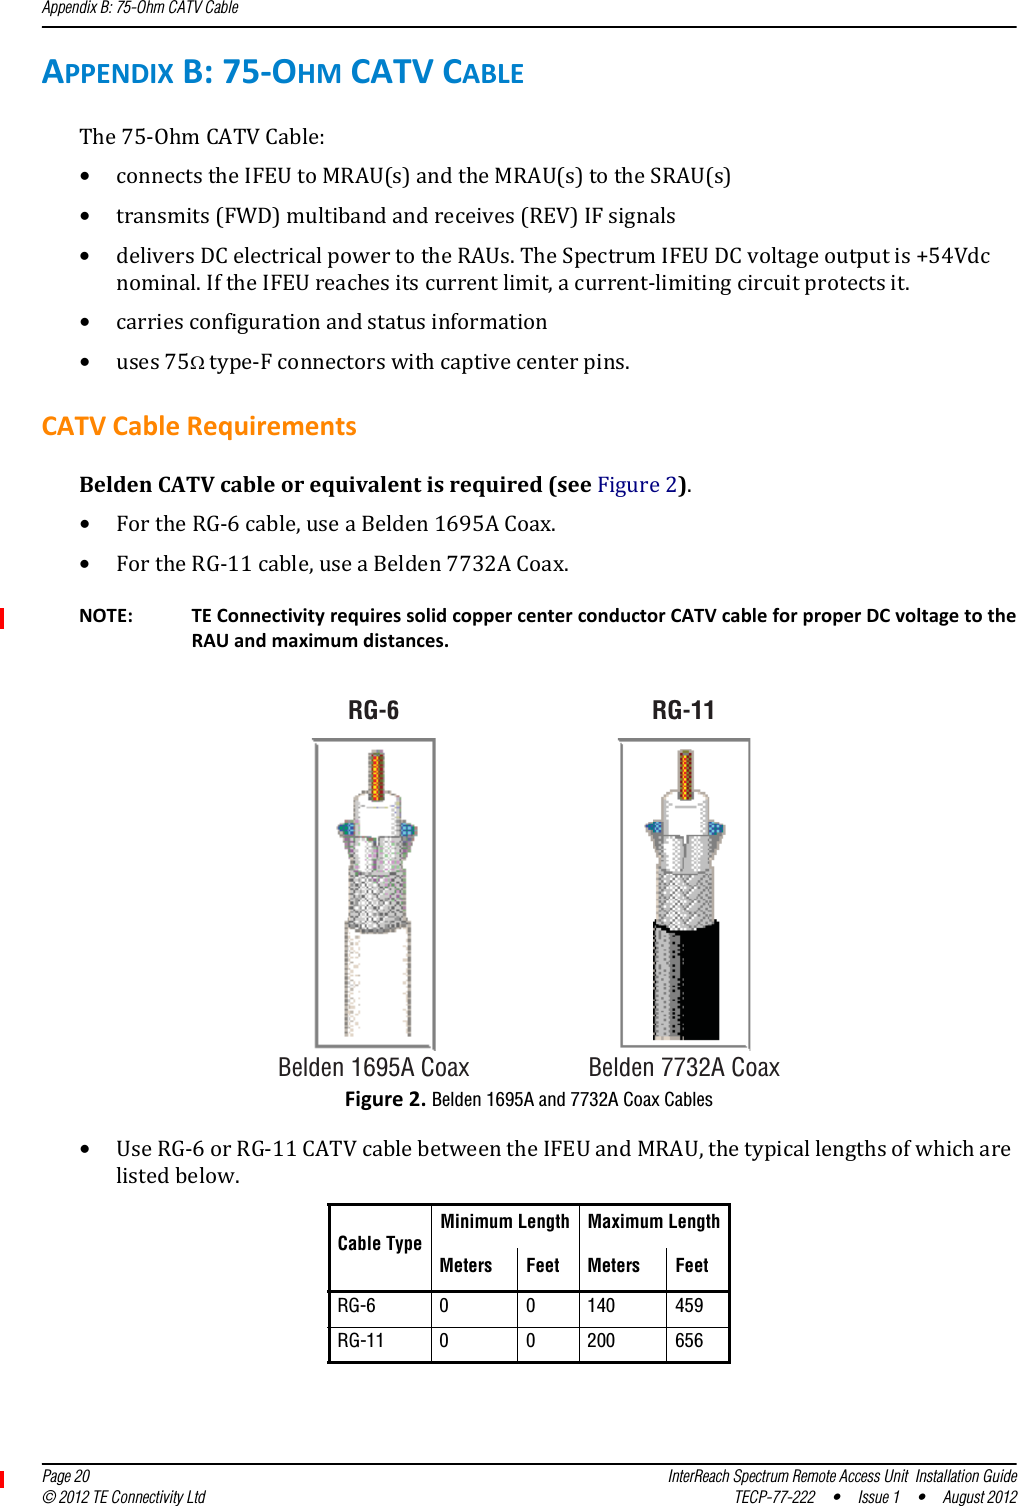 Appendix B: 75-Ohm CATV Cable  Page 20 InterReach Spectrum Remote Access Unit  Installation Guide© 2012 TE Connectivity Ltd TECP-77-222 • Issue 1 • August 2012APPENDIXB:75‐OHMCATVCABLEThe75‐OhmCATVCable:•connectstheIFEUtoMRAU(s)andtheMRAU(s)totheSRAU(s)•transmits(FWD)multibandandreceives(REV)IFsignals•deliversDCelectricalpowertotheRAUs.TheSpectrumIFEUDCvoltageoutputis+54Vdcnominal.IftheIFEUreachesitscurrentlimit,acurrent‐limitingcircuitprotectsit.•carriesconfigurationandstatusinformation•uses75type‐Fconnectorswithcaptivecenterpins.CATVCableRequirementsBeldenCATVcableorequivalentisrequired(seeFigure2).•FortheRG‐6cable,useaBelden1695ACoax.•FortheRG‐11cable,useaBelden7732ACoax.RG-11Belden 1695A CoaxRG-6Belden 7732A CoaxNOTE: TEConnectivityrequiressolidcoppercenterconductorCATVcableforproperDCvoltagetotheRAUandmaximumdistances.Figure2.Belden 1695A and 7732A Coax Cables•UseRG‐6orRG‐11CATVcablebetweentheIFEUandMRAU,thetypicallengthsofwhicharelistedbelow.Cable TypeMinimum Length Maximum LengthMeters Feet Meters FeetRG-6 0 0 140 459RG-11 0 0 200 656